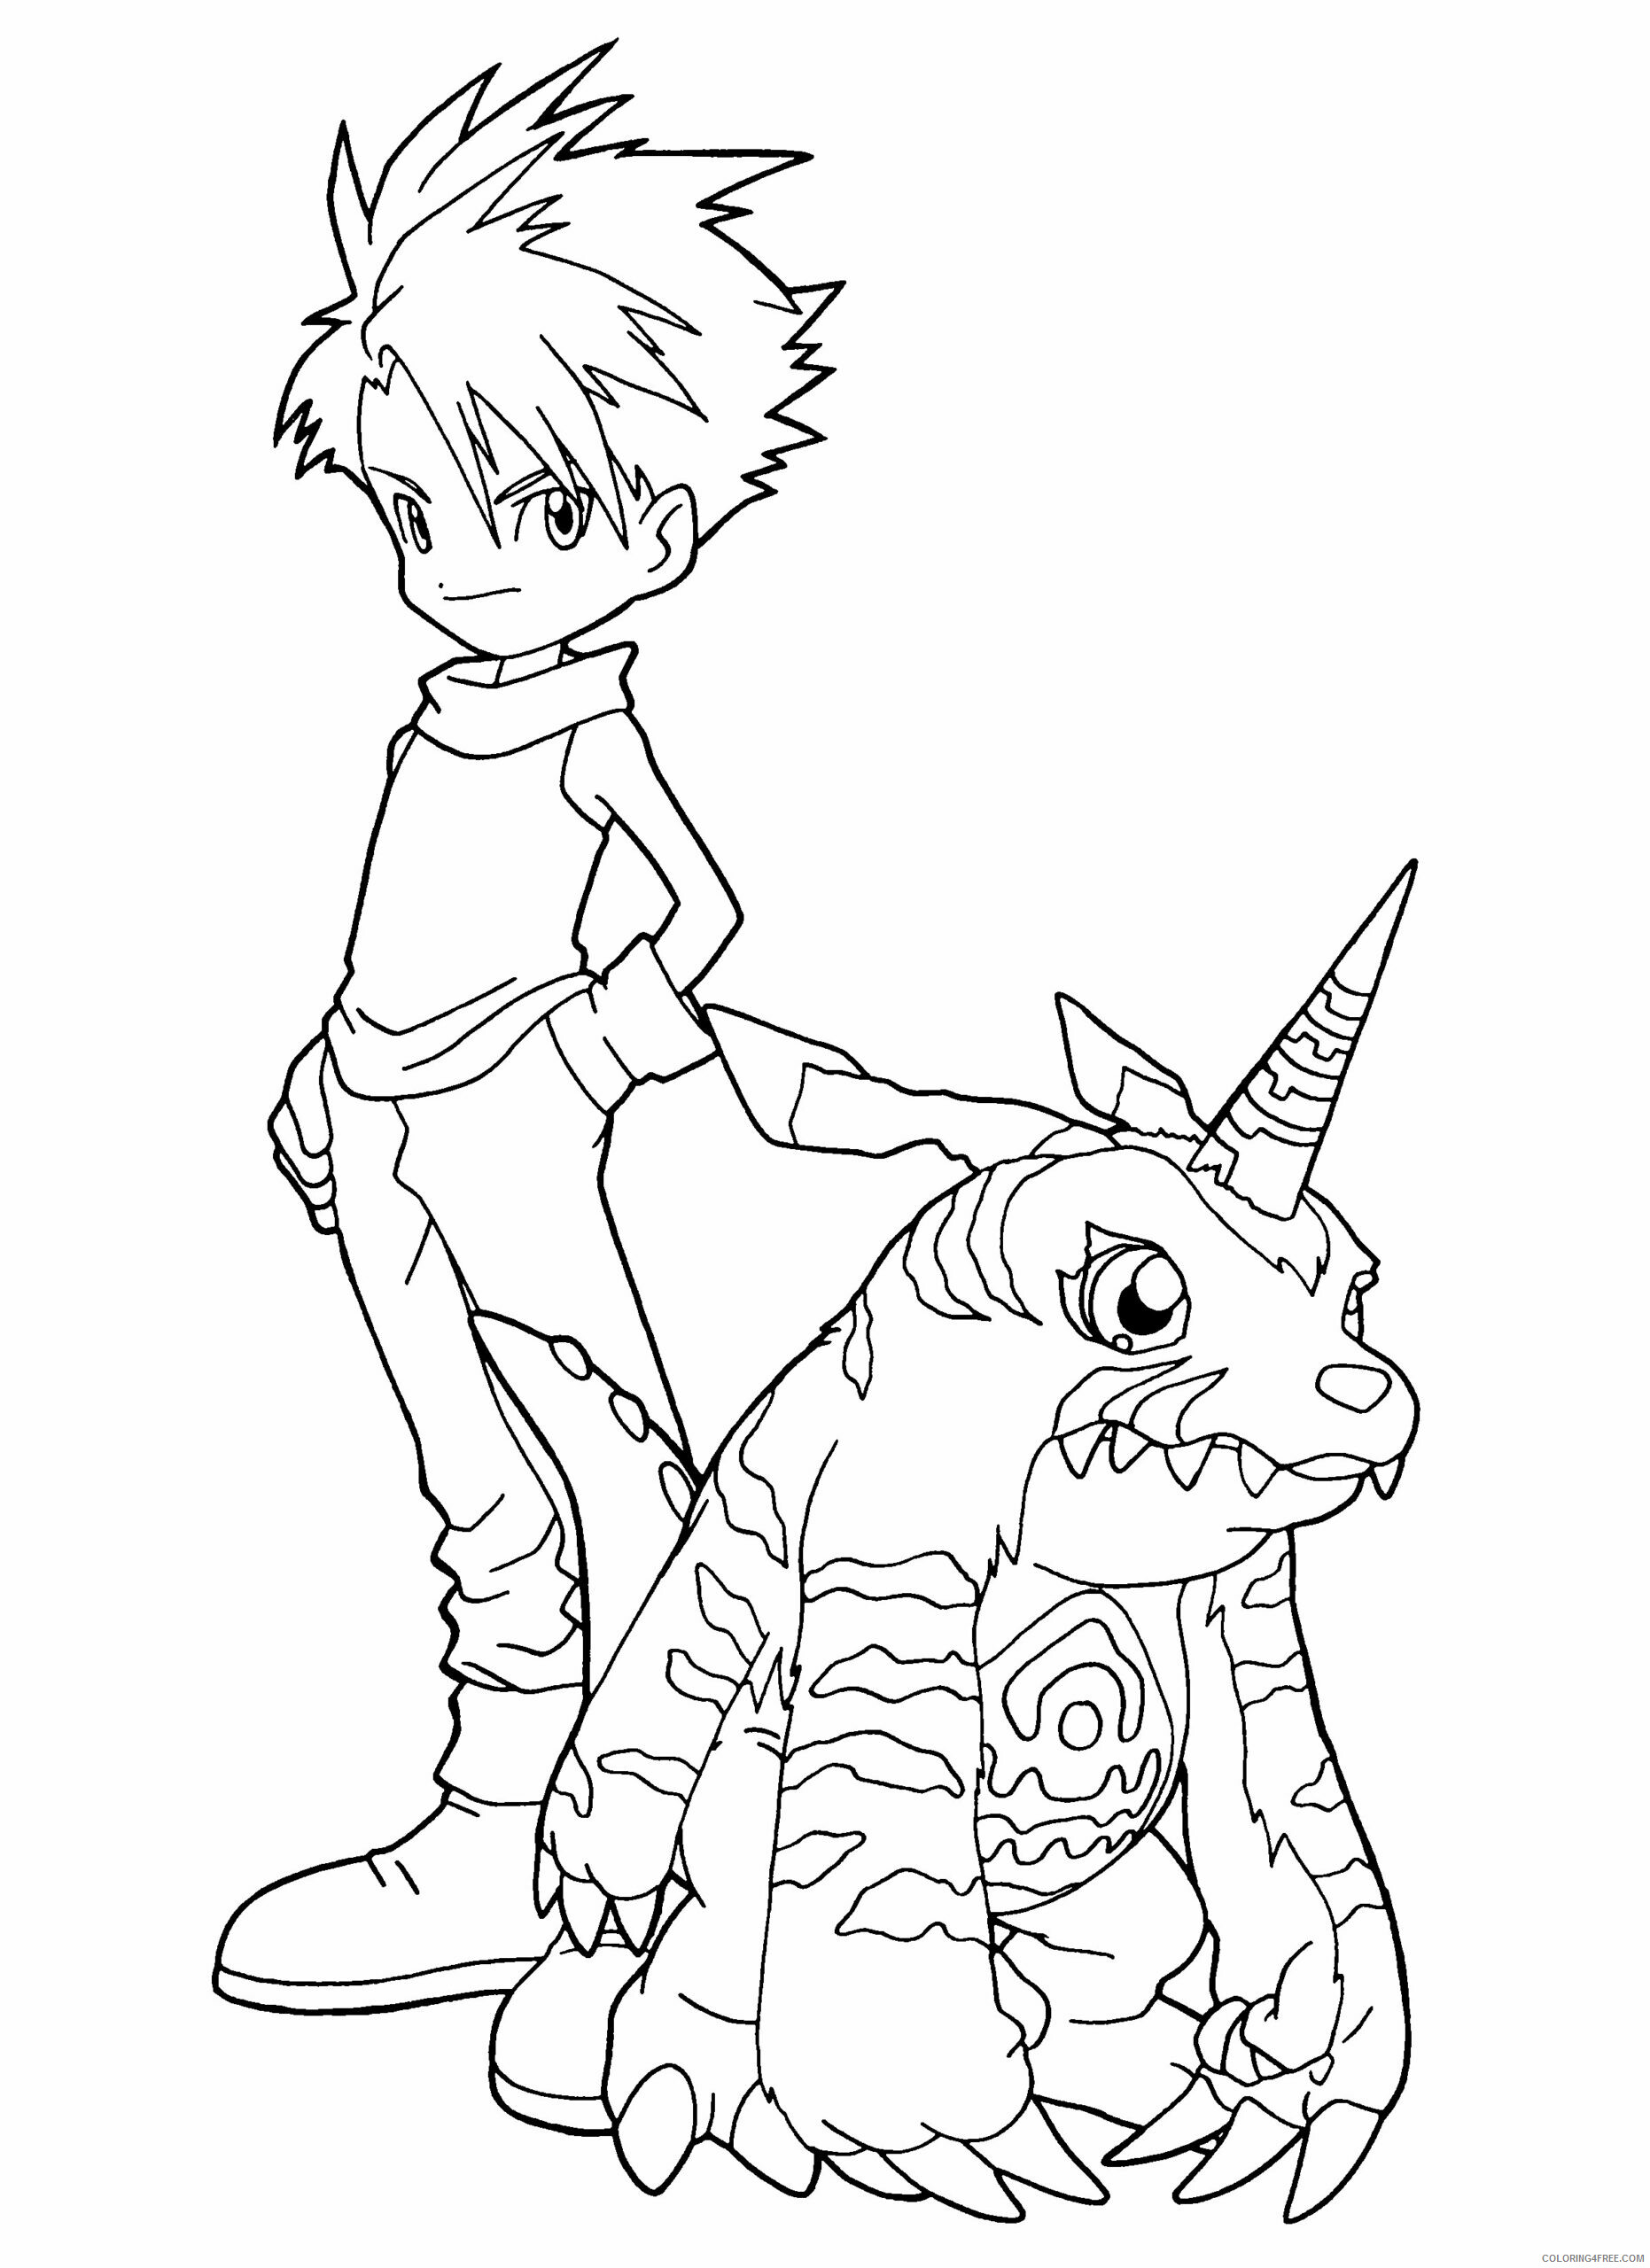 Digimon Printable Coloring Pages Anime digimon 96 2021 0393 Coloring4free